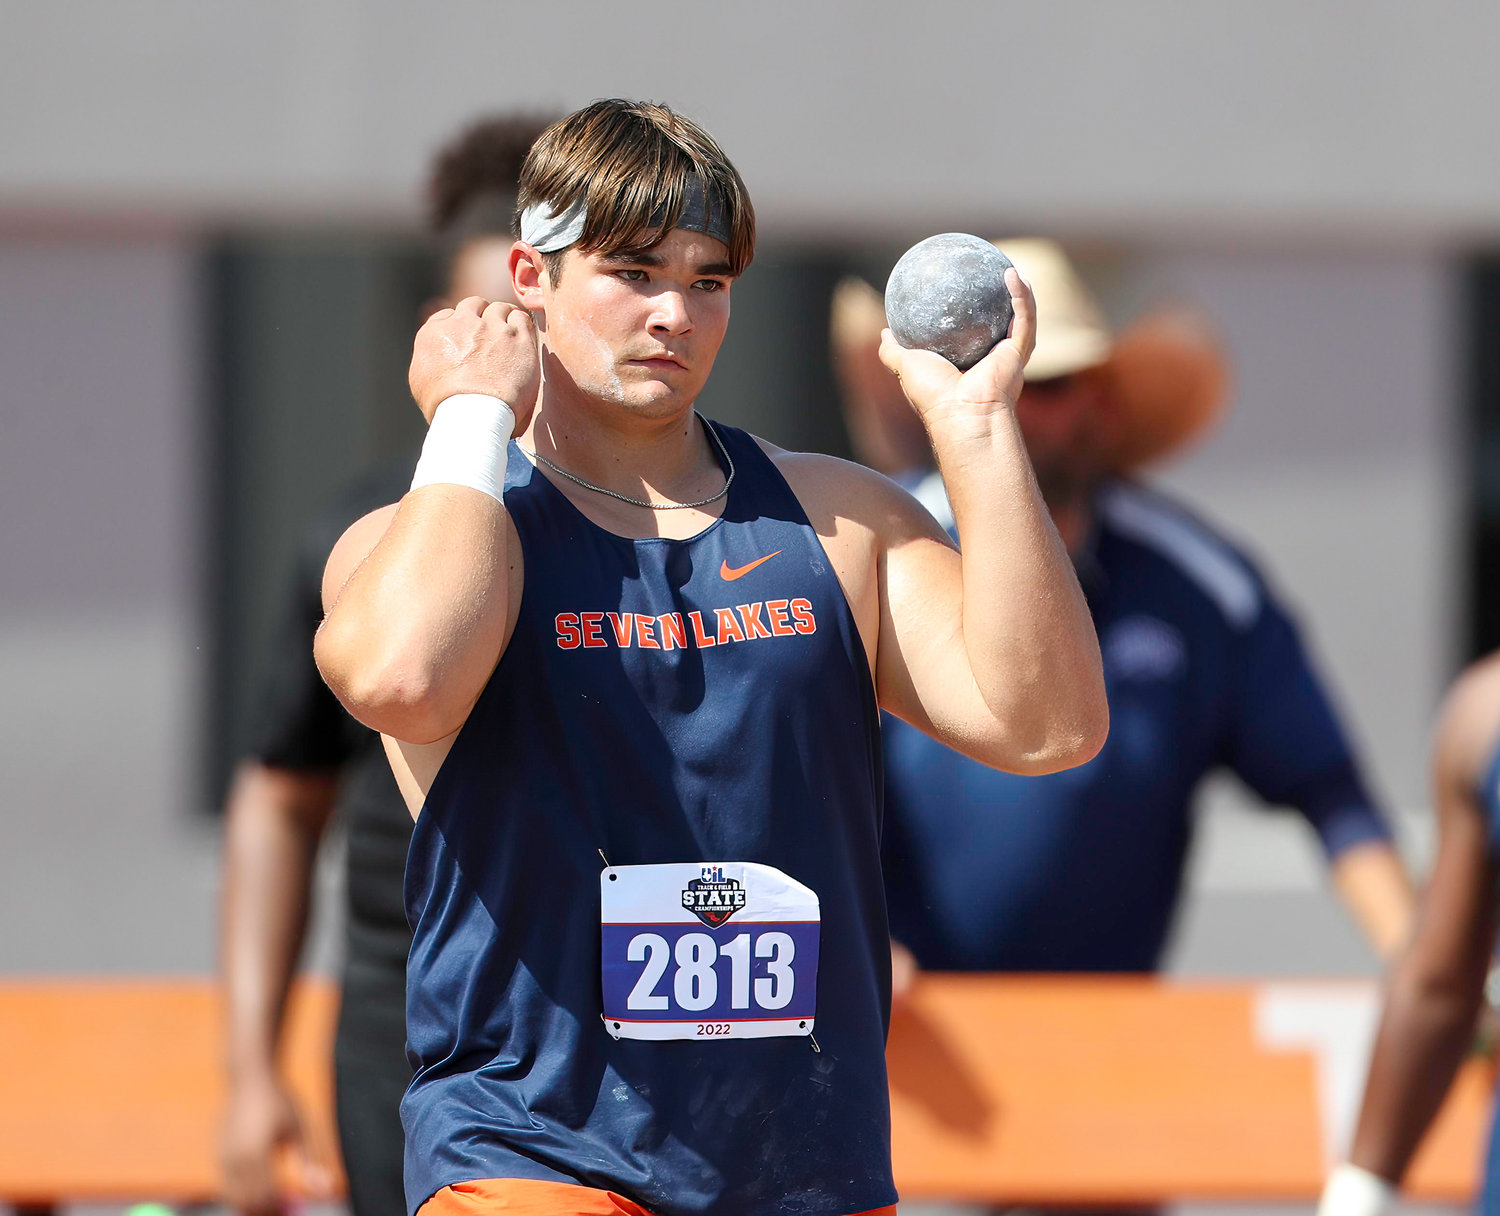 Matthew Rueff of Katy Seven Lakes competes in the Class 6A boys long jump event at the UIL State Track and Field Meet on May 14, 2022 in Austin, Texas. Rueff earned a gold medal with a put of 68-1.75 feet.